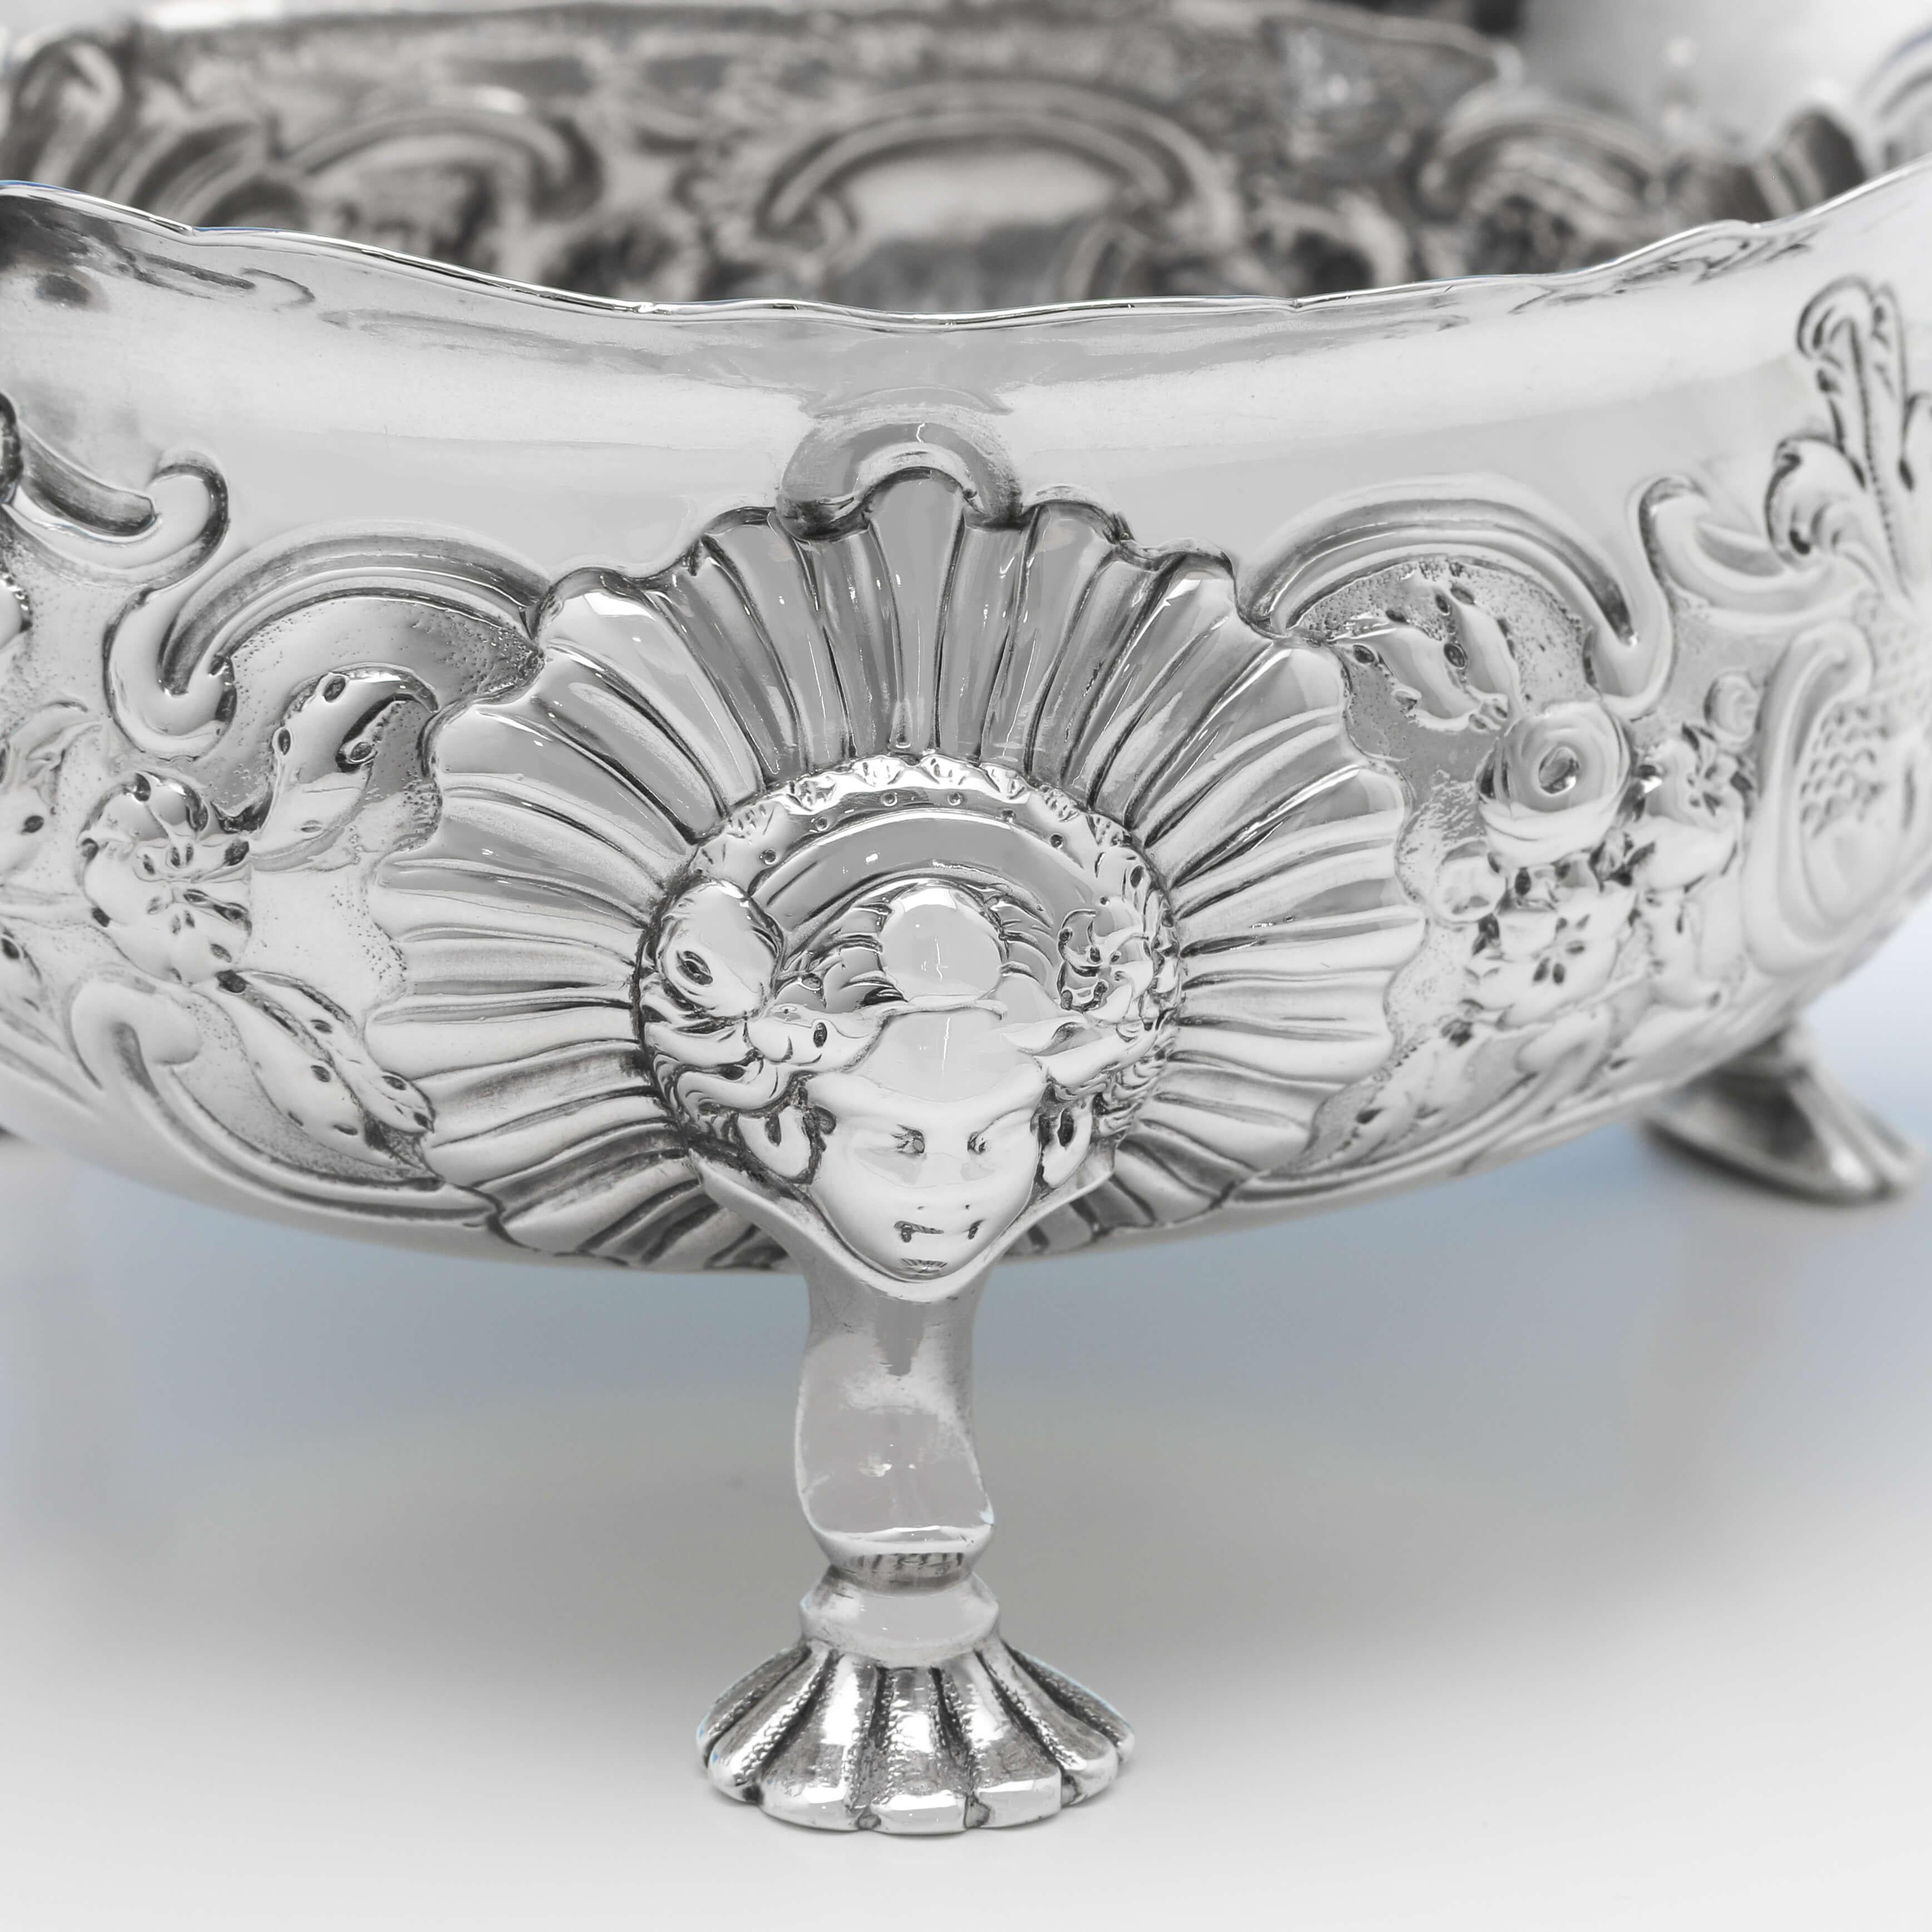 Mid-18th Century Rococo Period Antique Sterling Silver Pair of Sauce Boats London 1746 R. Kersill For Sale